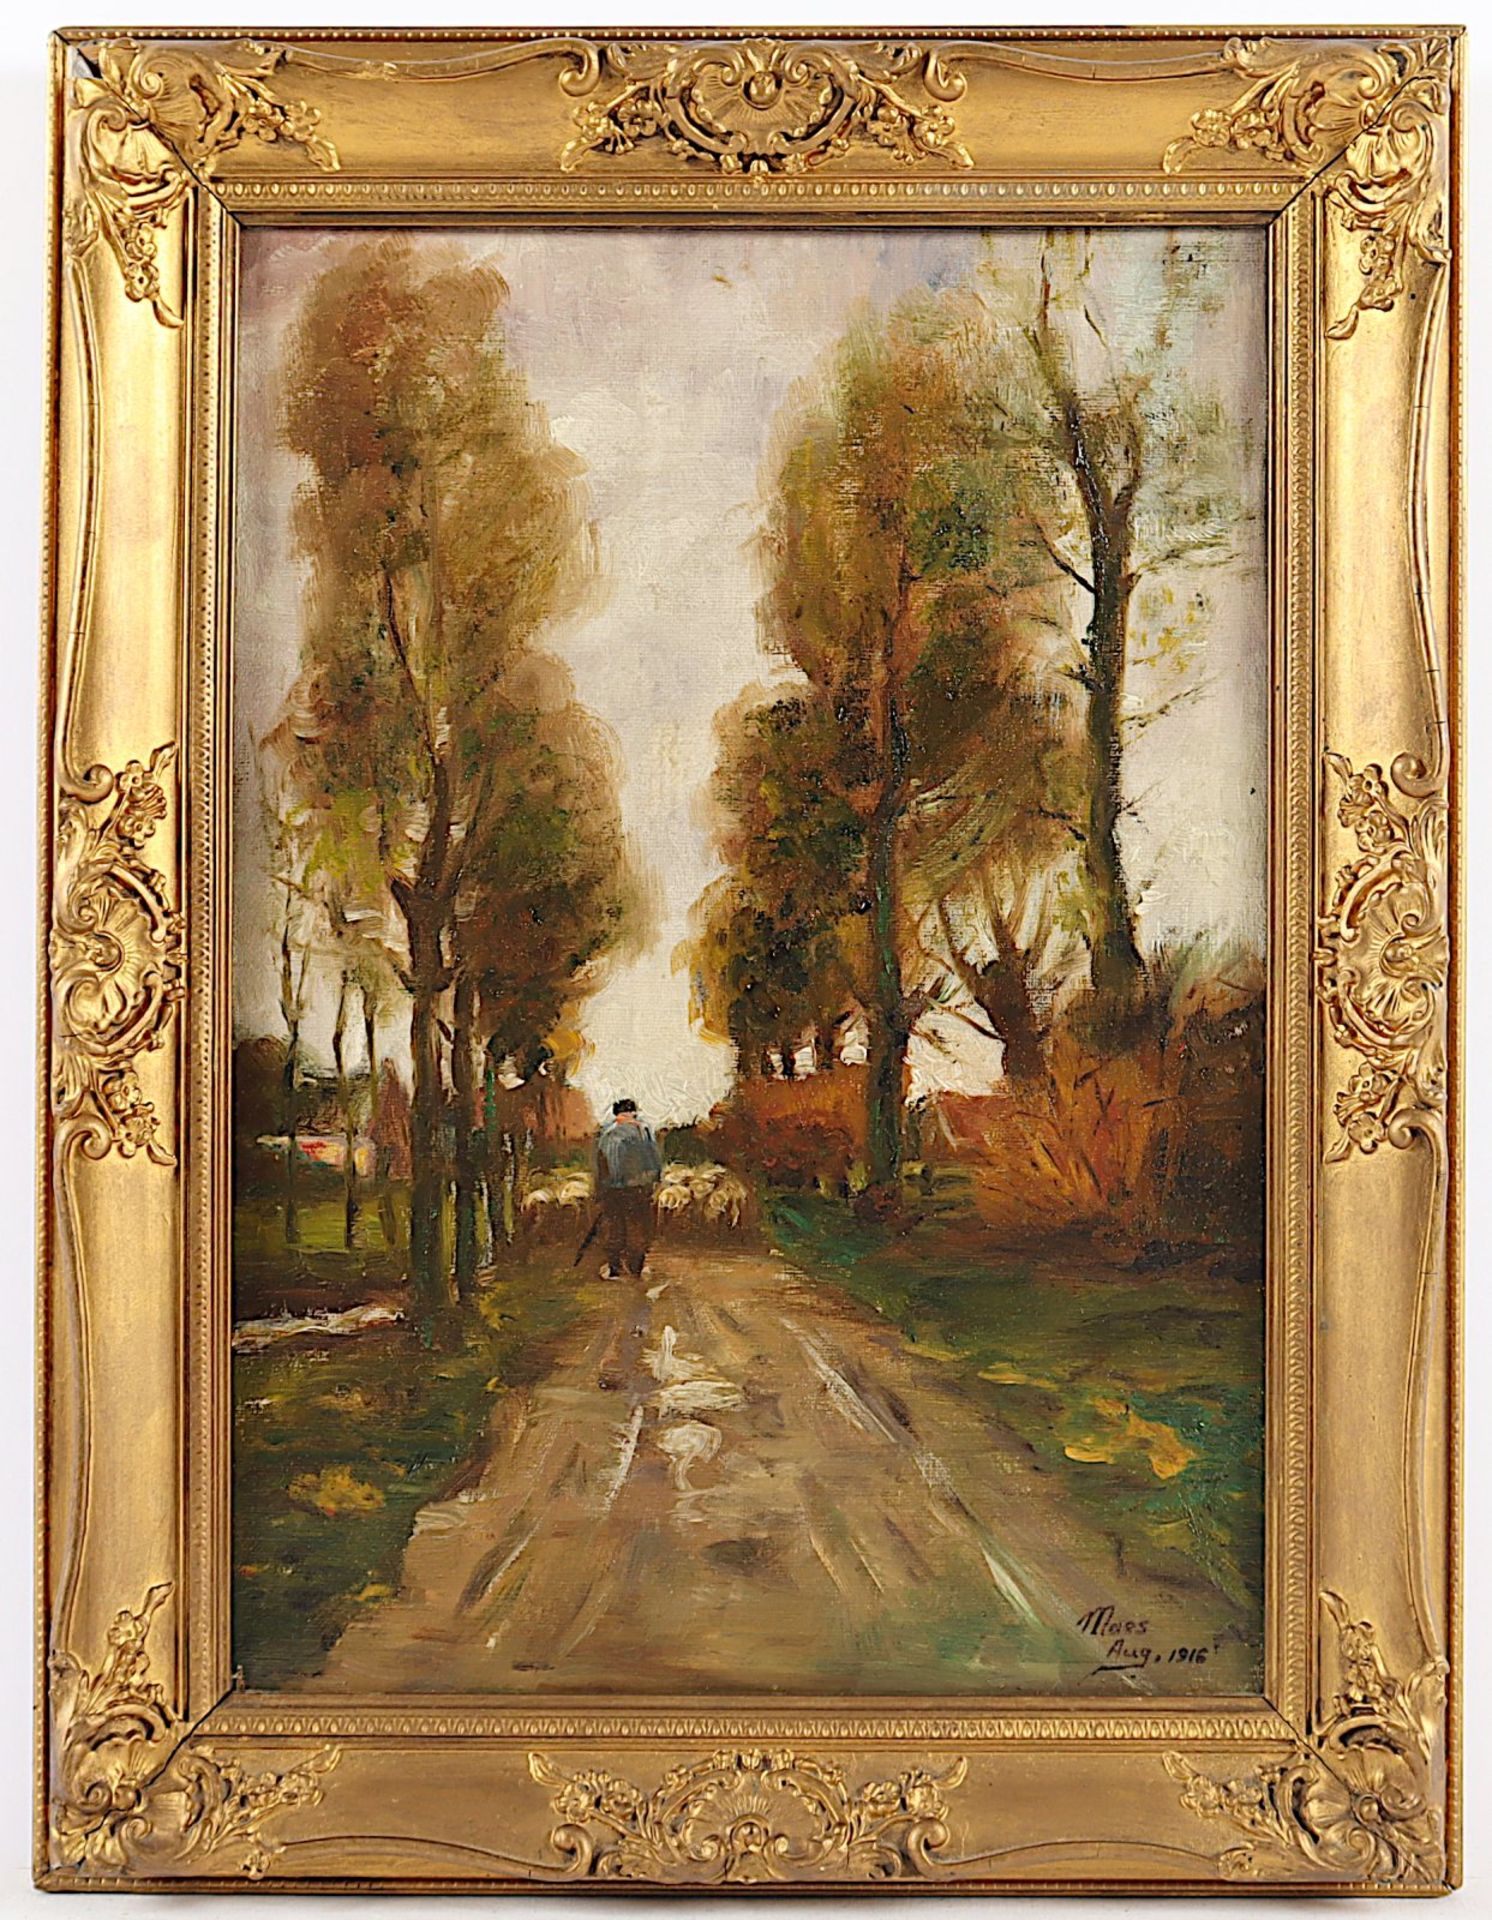 MAES (Maler A.20.Jh.), "Allee mit